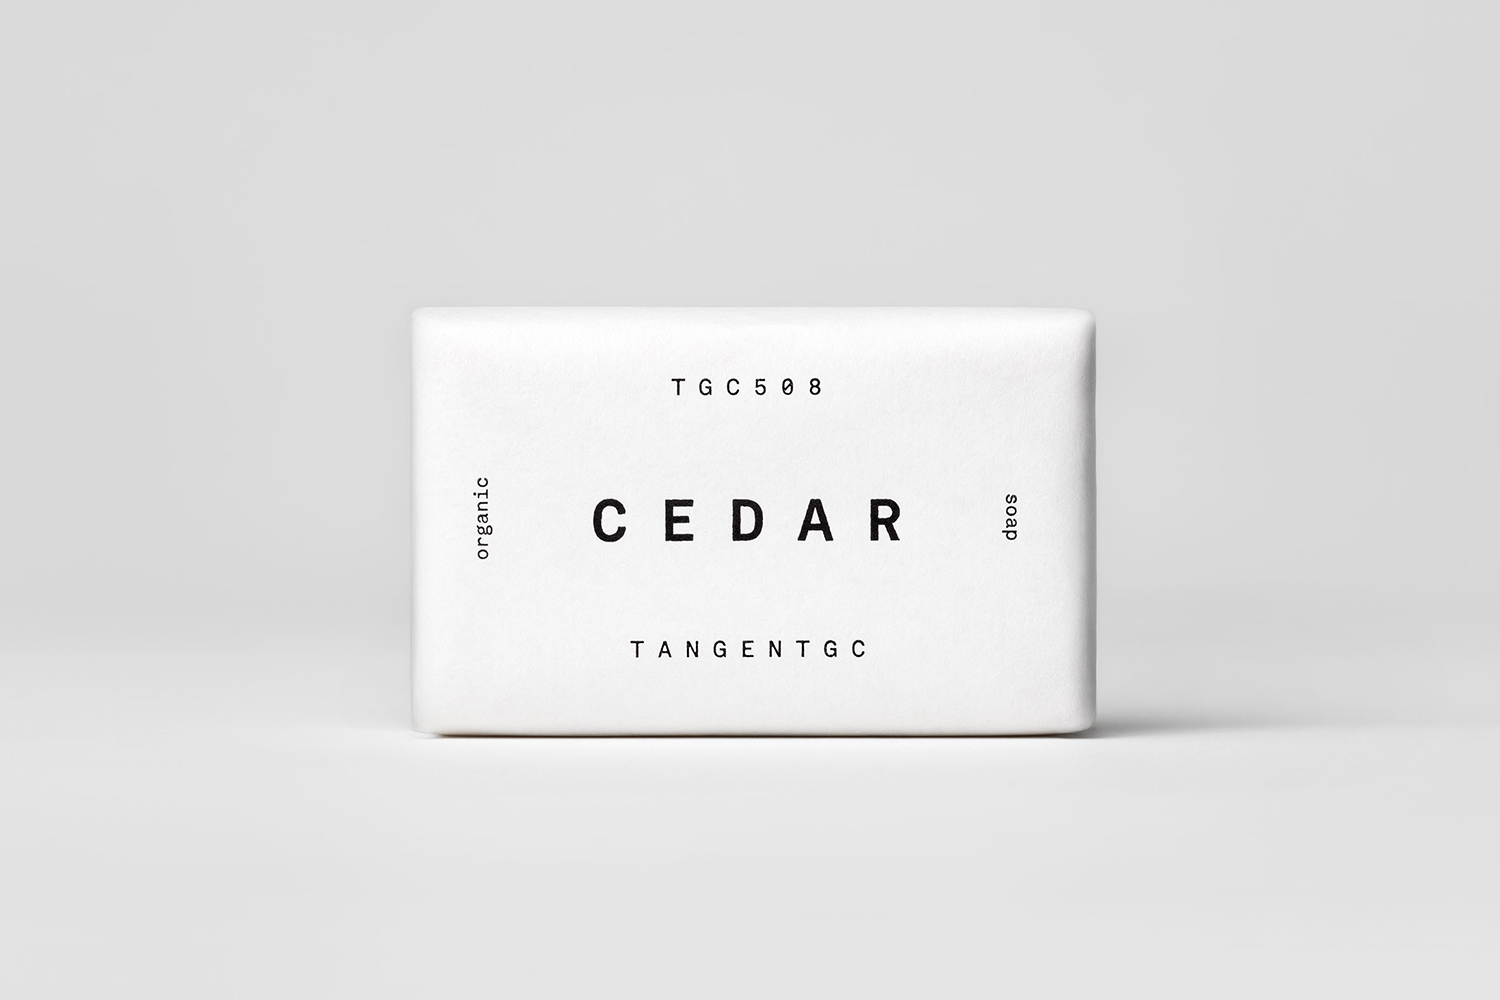 New packaging designed by Carl Nas Associates for Tangent GC's new line of low-impact organic, vegan, cruelty and fossil free soap range.